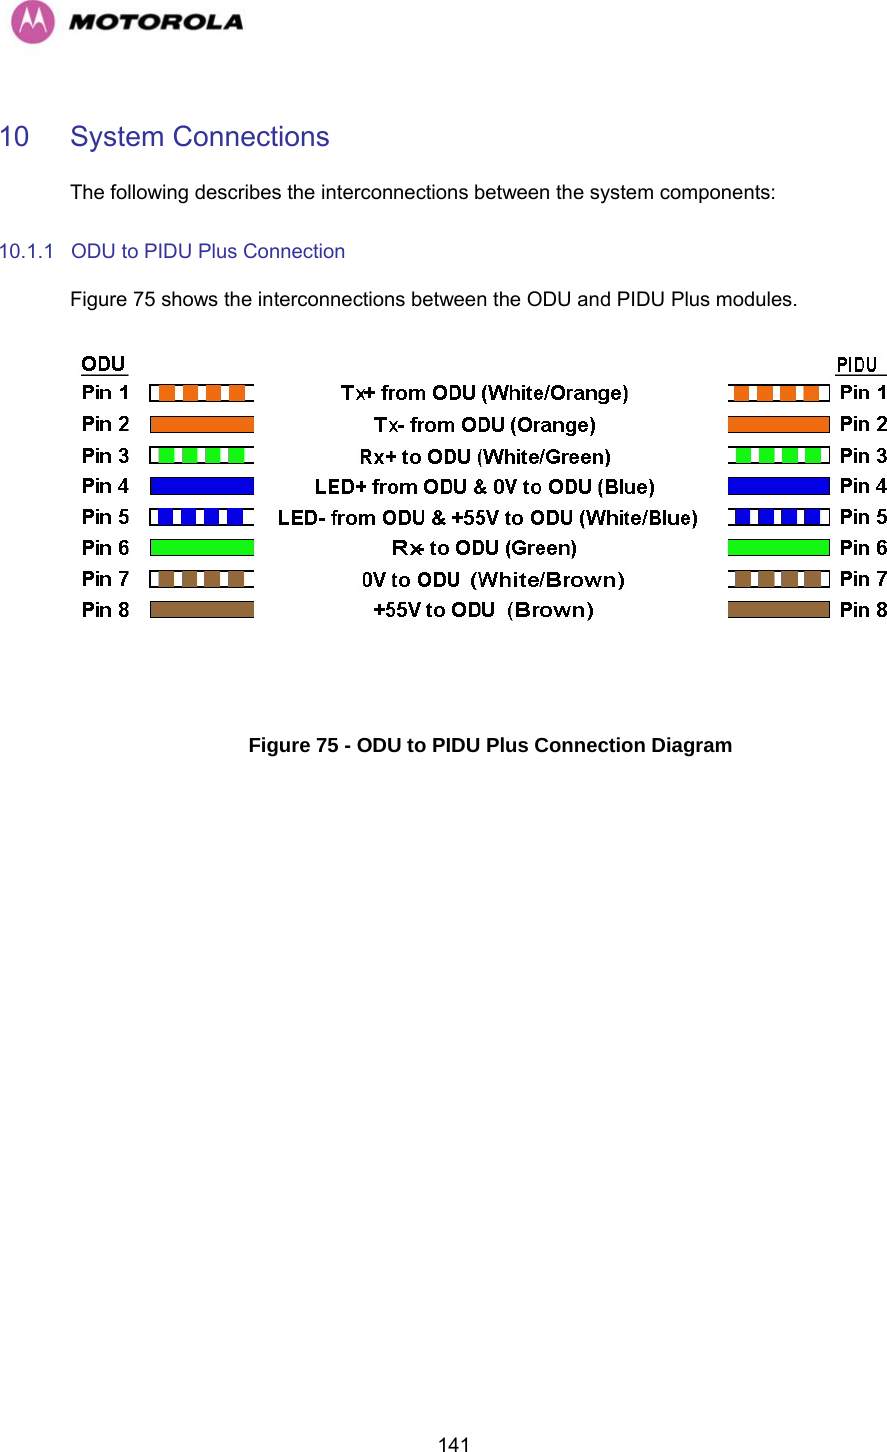   14110 System Connections  The following describes the interconnections between the system components: 10.1.1  ODU to PIDU Plus Connection Figure 75 shows the interconnections between the ODU and PIDU Plus modules.         Figure 75 - ODU to PIDU Plus Connection Diagram 